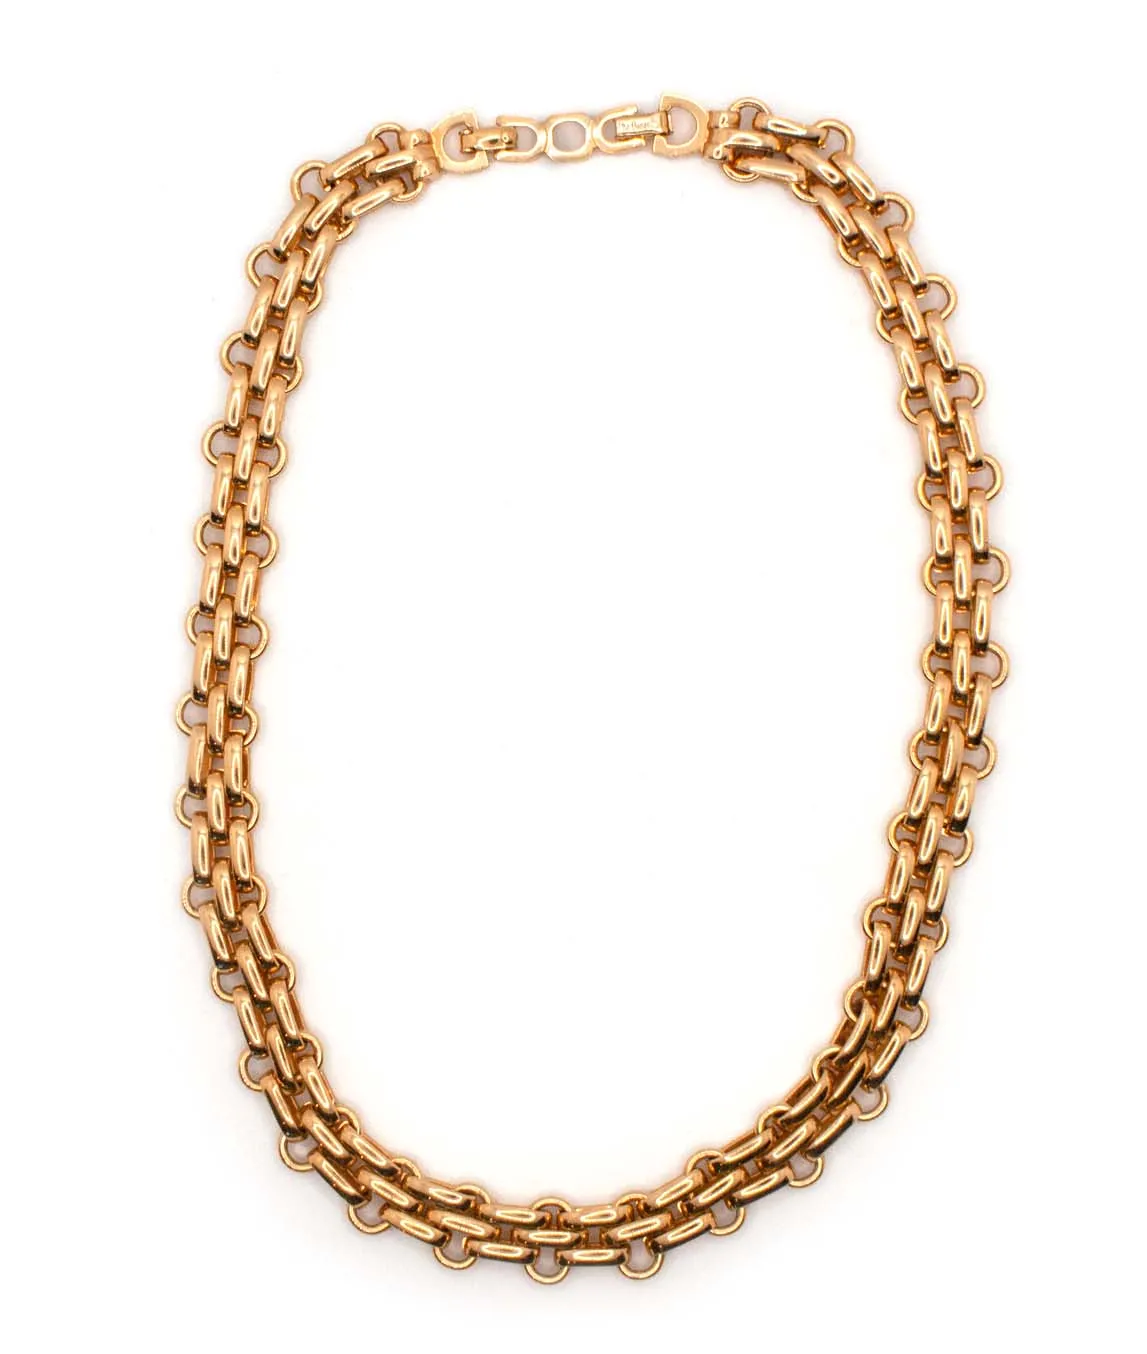 Christian Dior chunky fancy link gold plated chain necklace